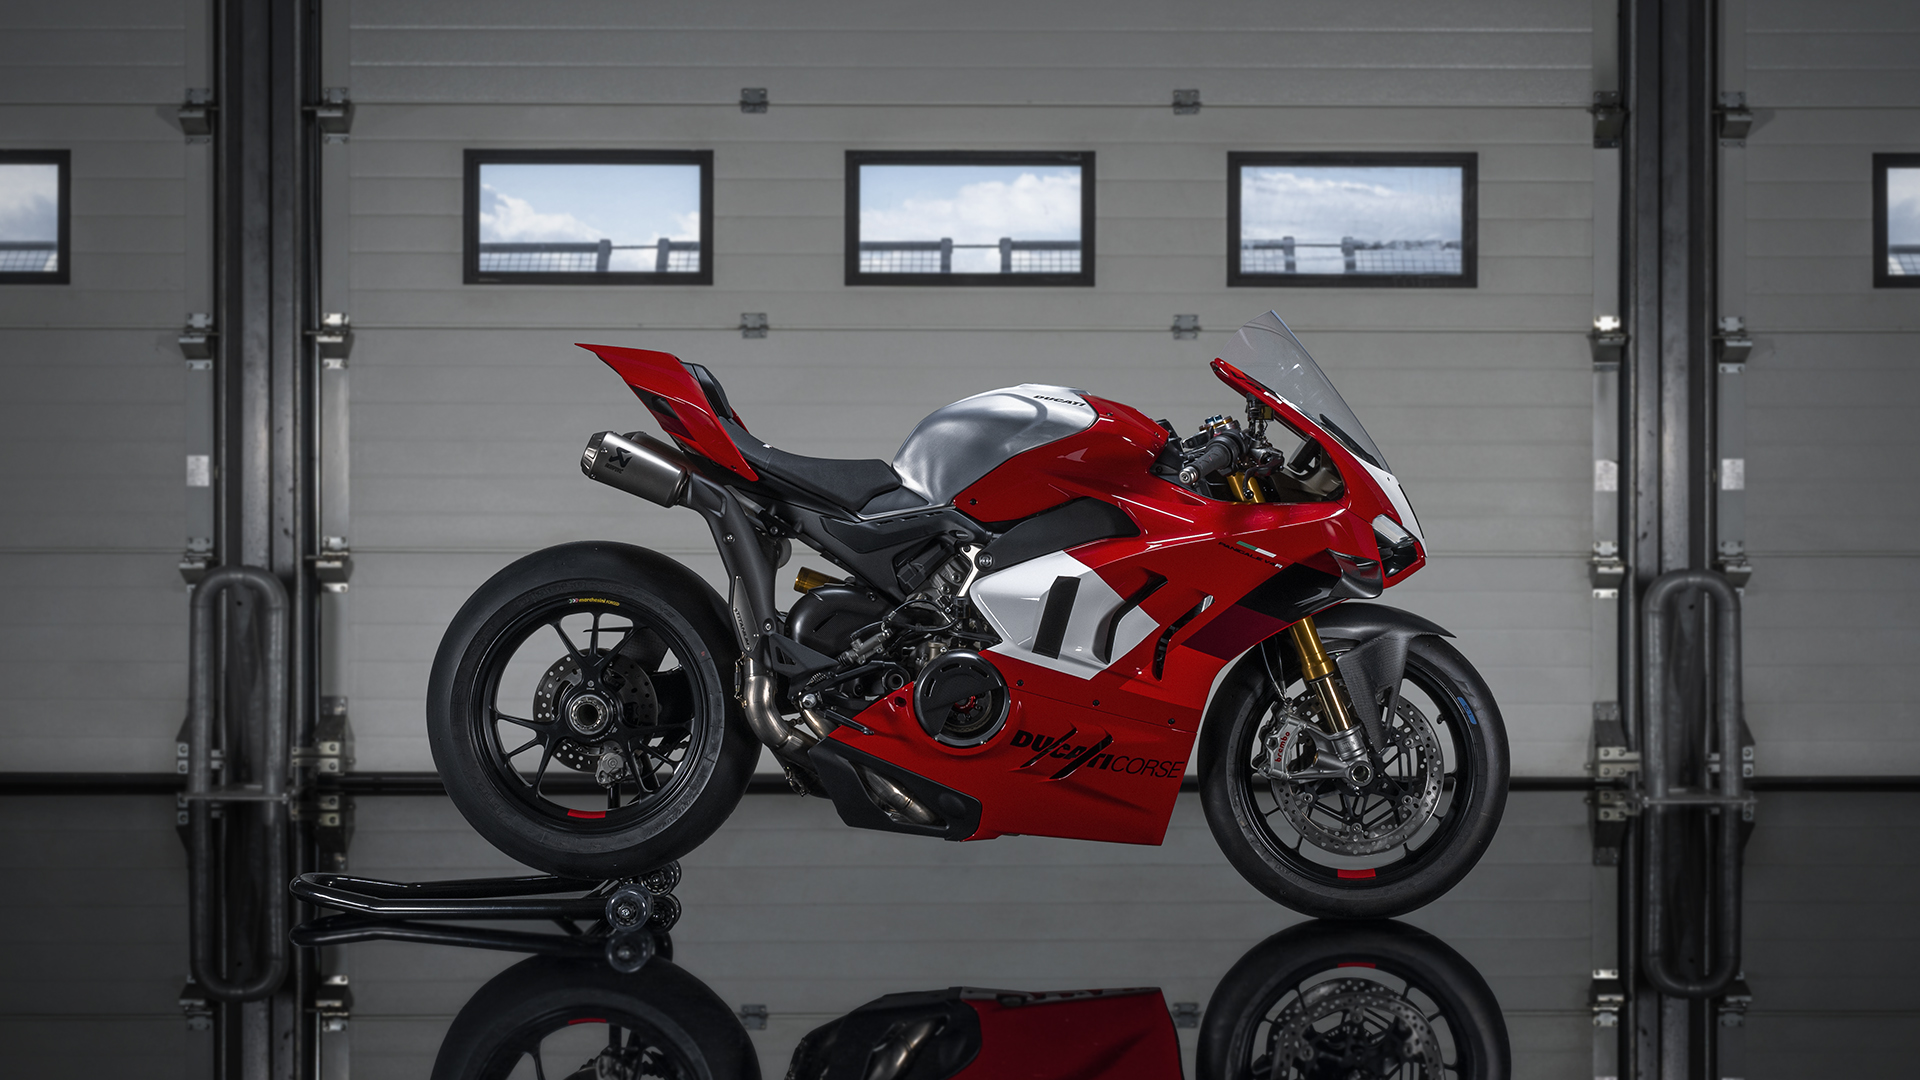 Ducati-Panigale-V4R-MY23-performance-gallery-02-02-1920x1080